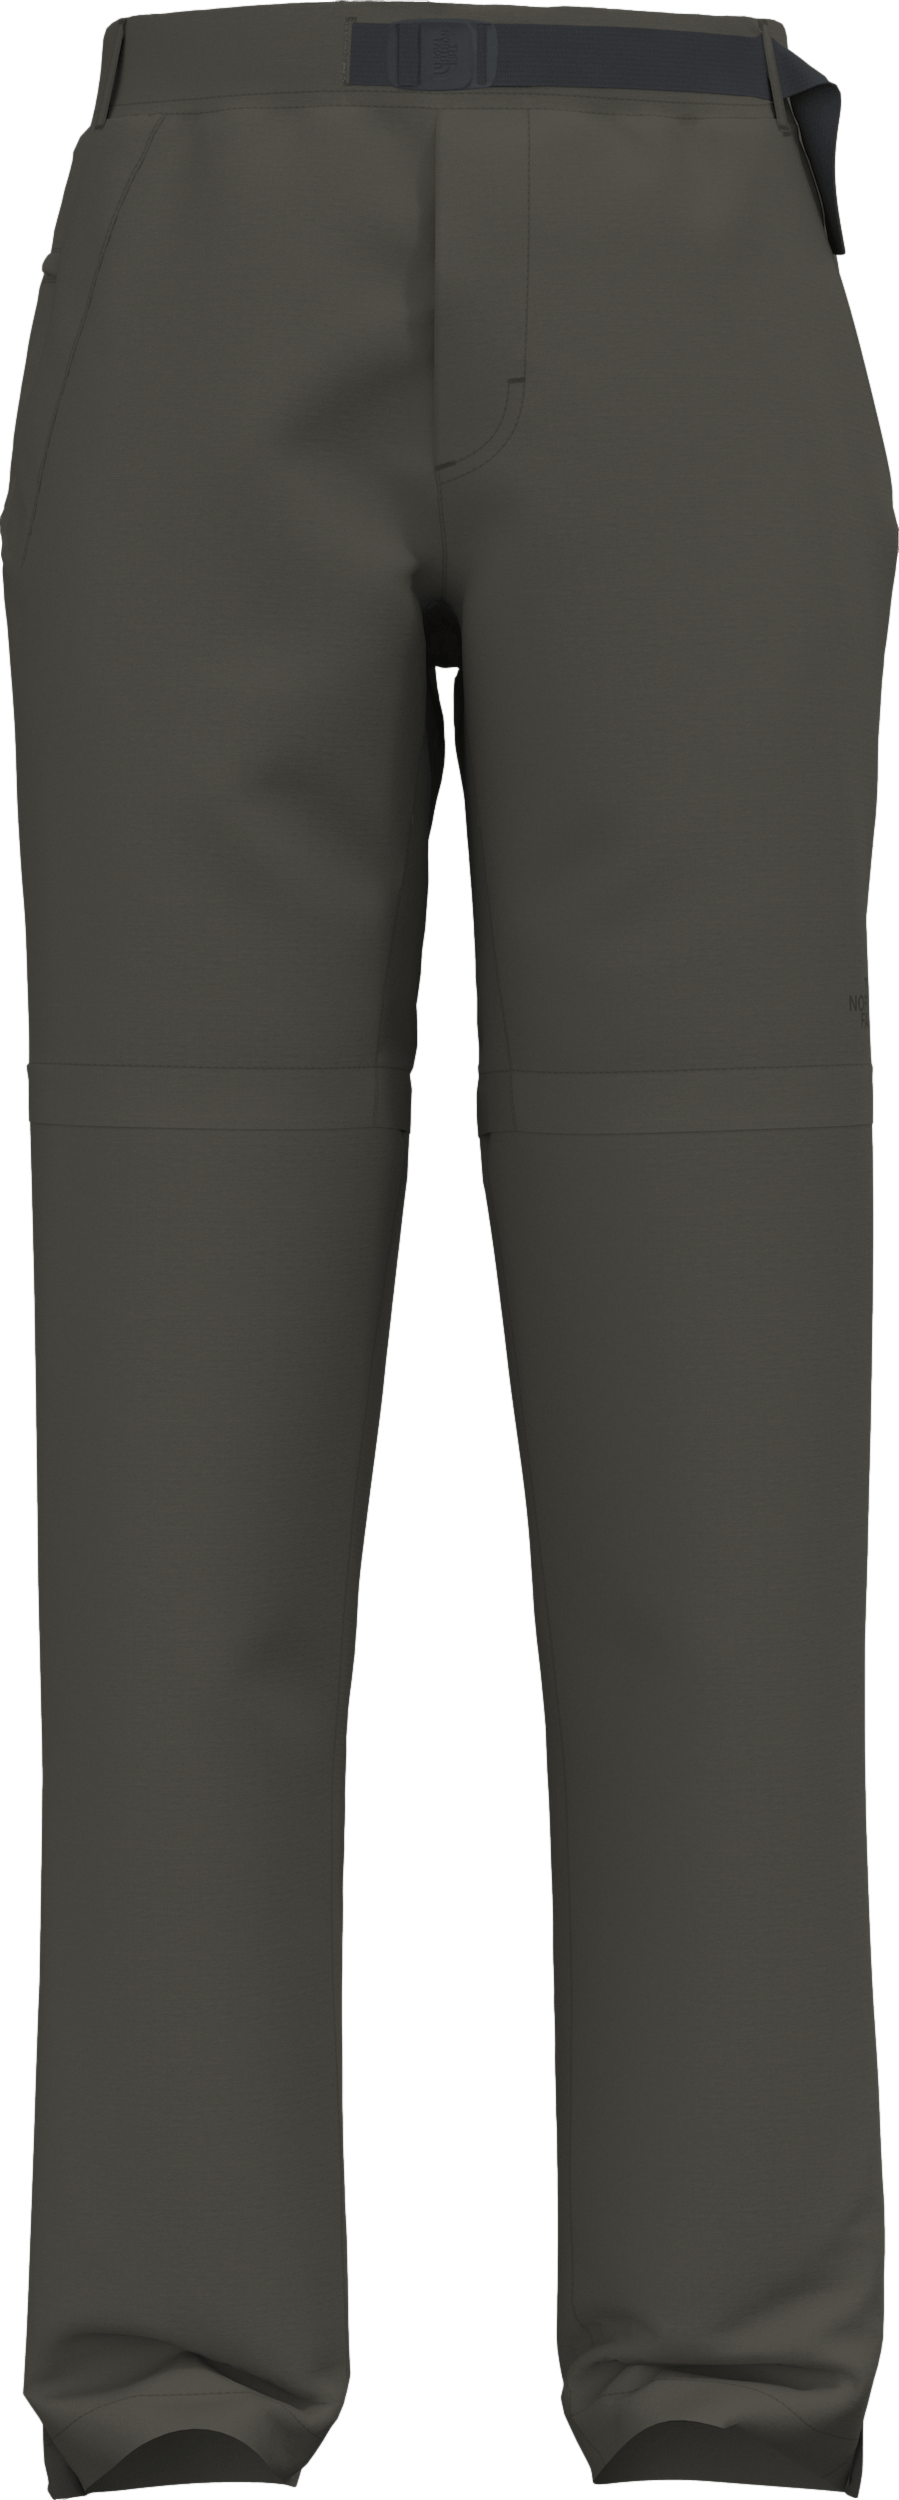 The North Face Men's Paramount Trail Convertible Pants